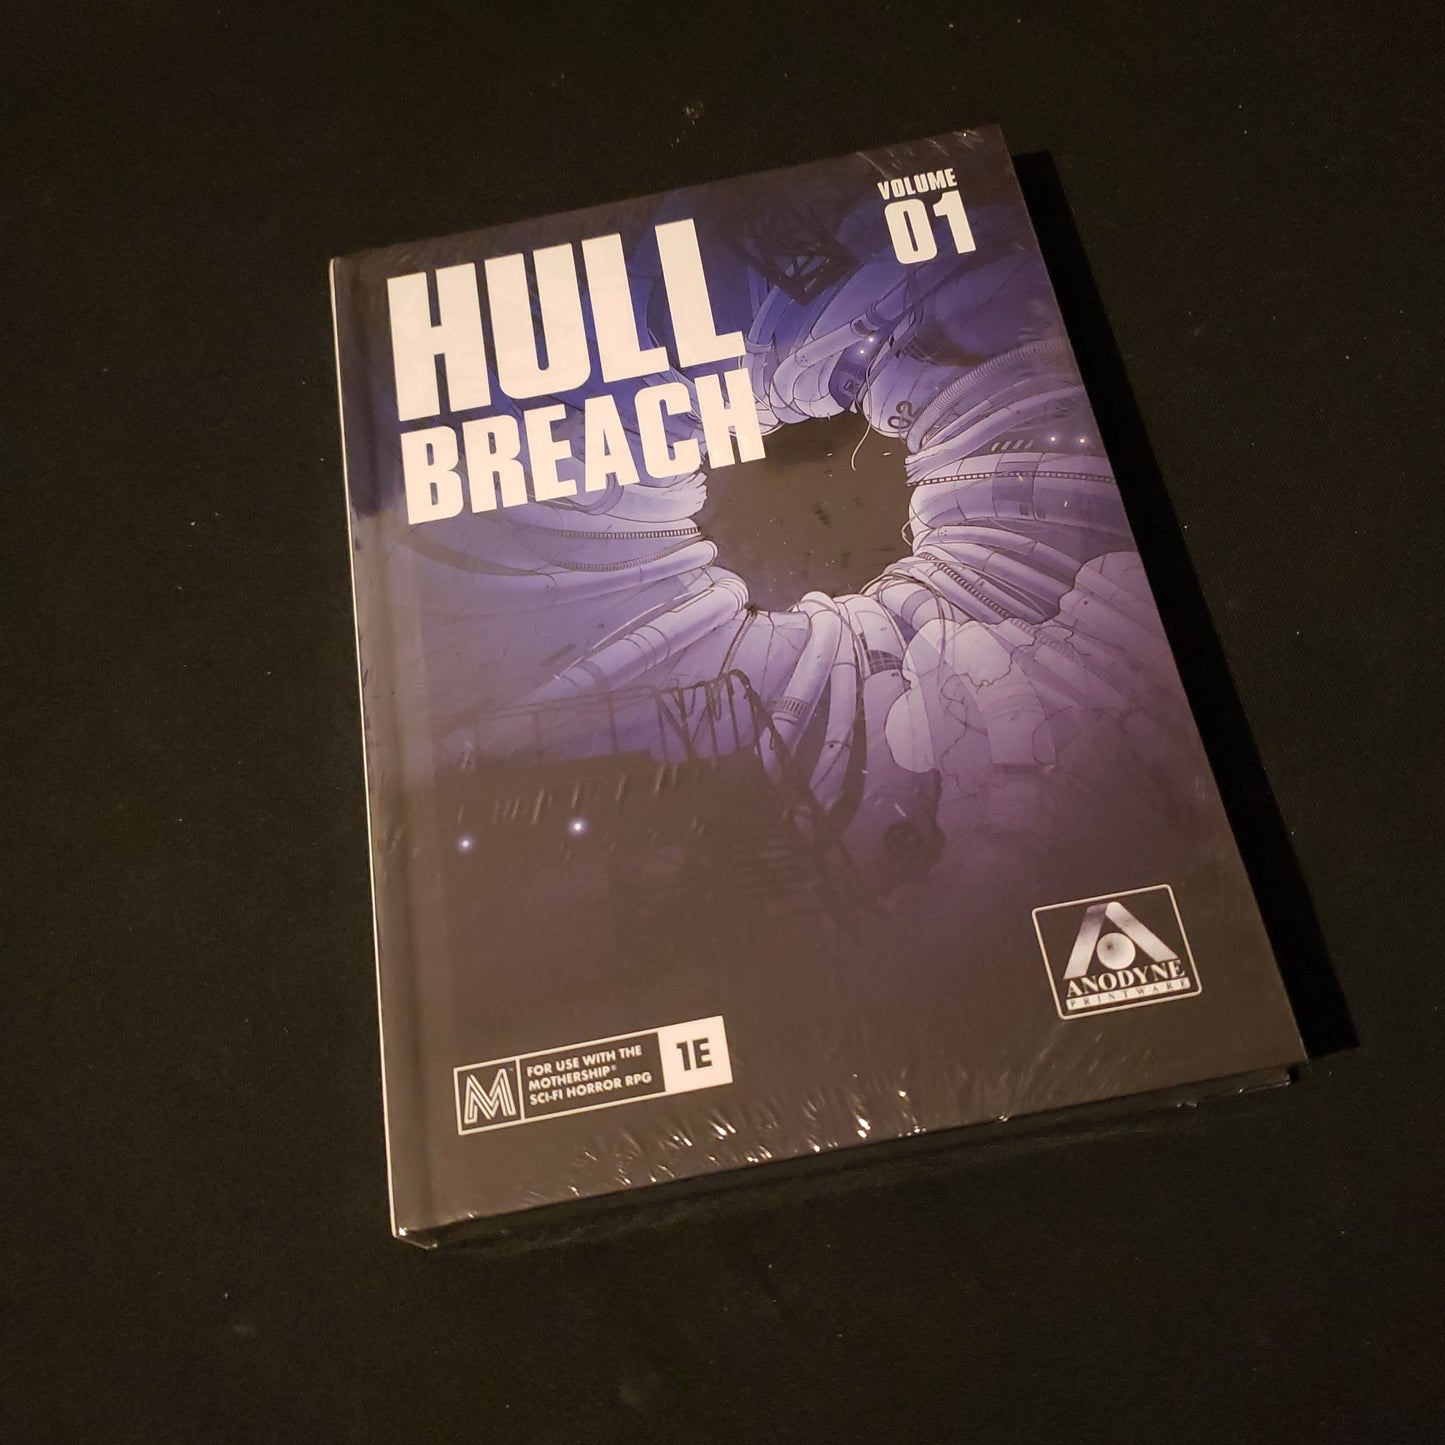 Image shows the front cover of the Hull Breach roleplaying game book